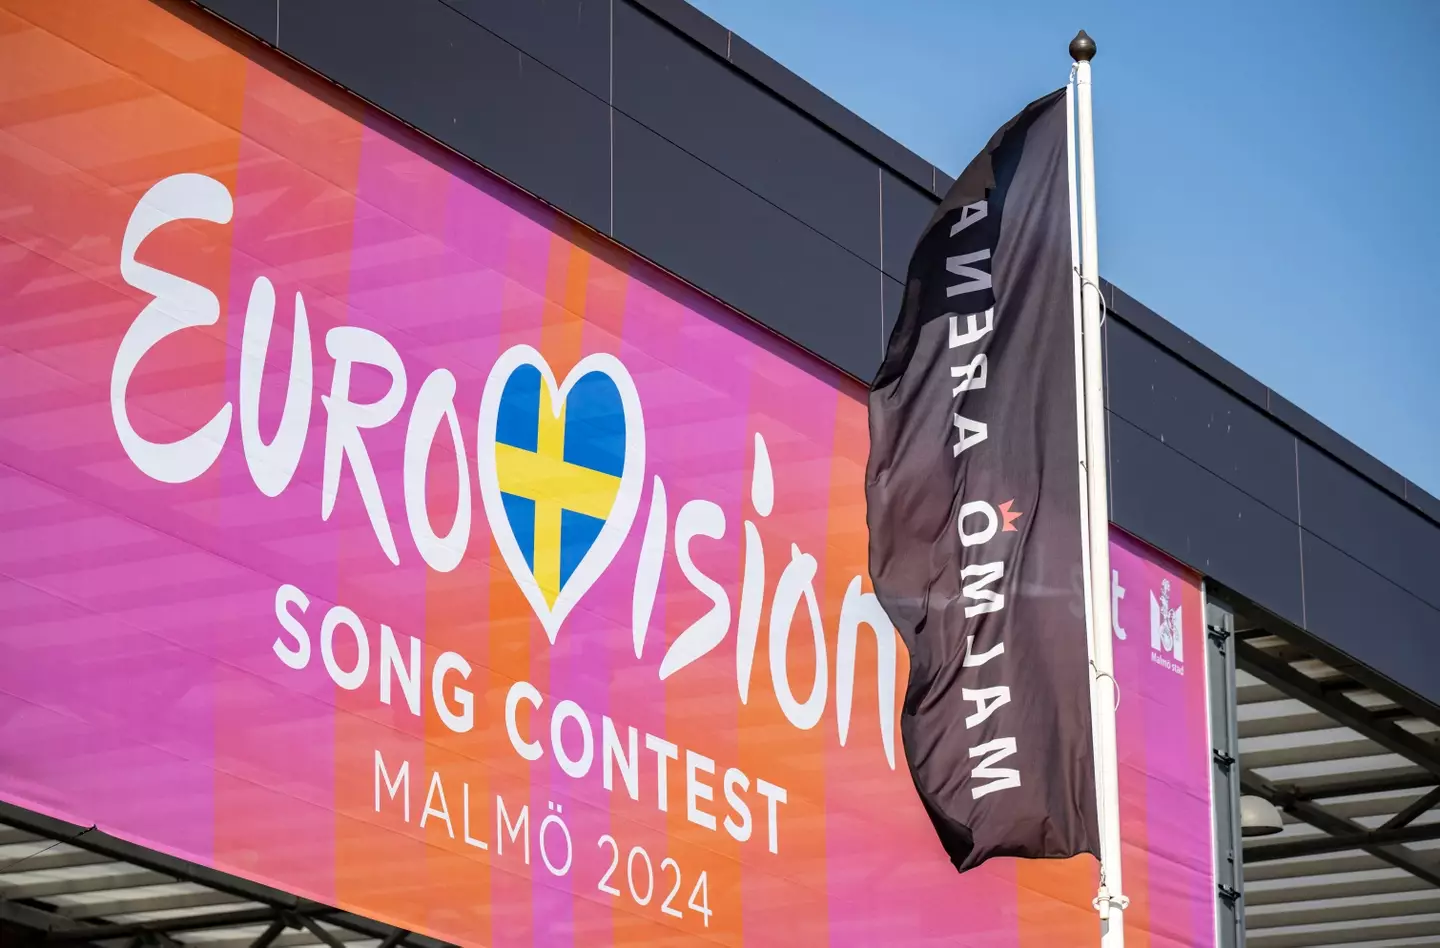 Malmo is busy getting ready for Eurovision. (JOHAN NILSSON/TT NEWS AGENCY/AFP via Getty Images)